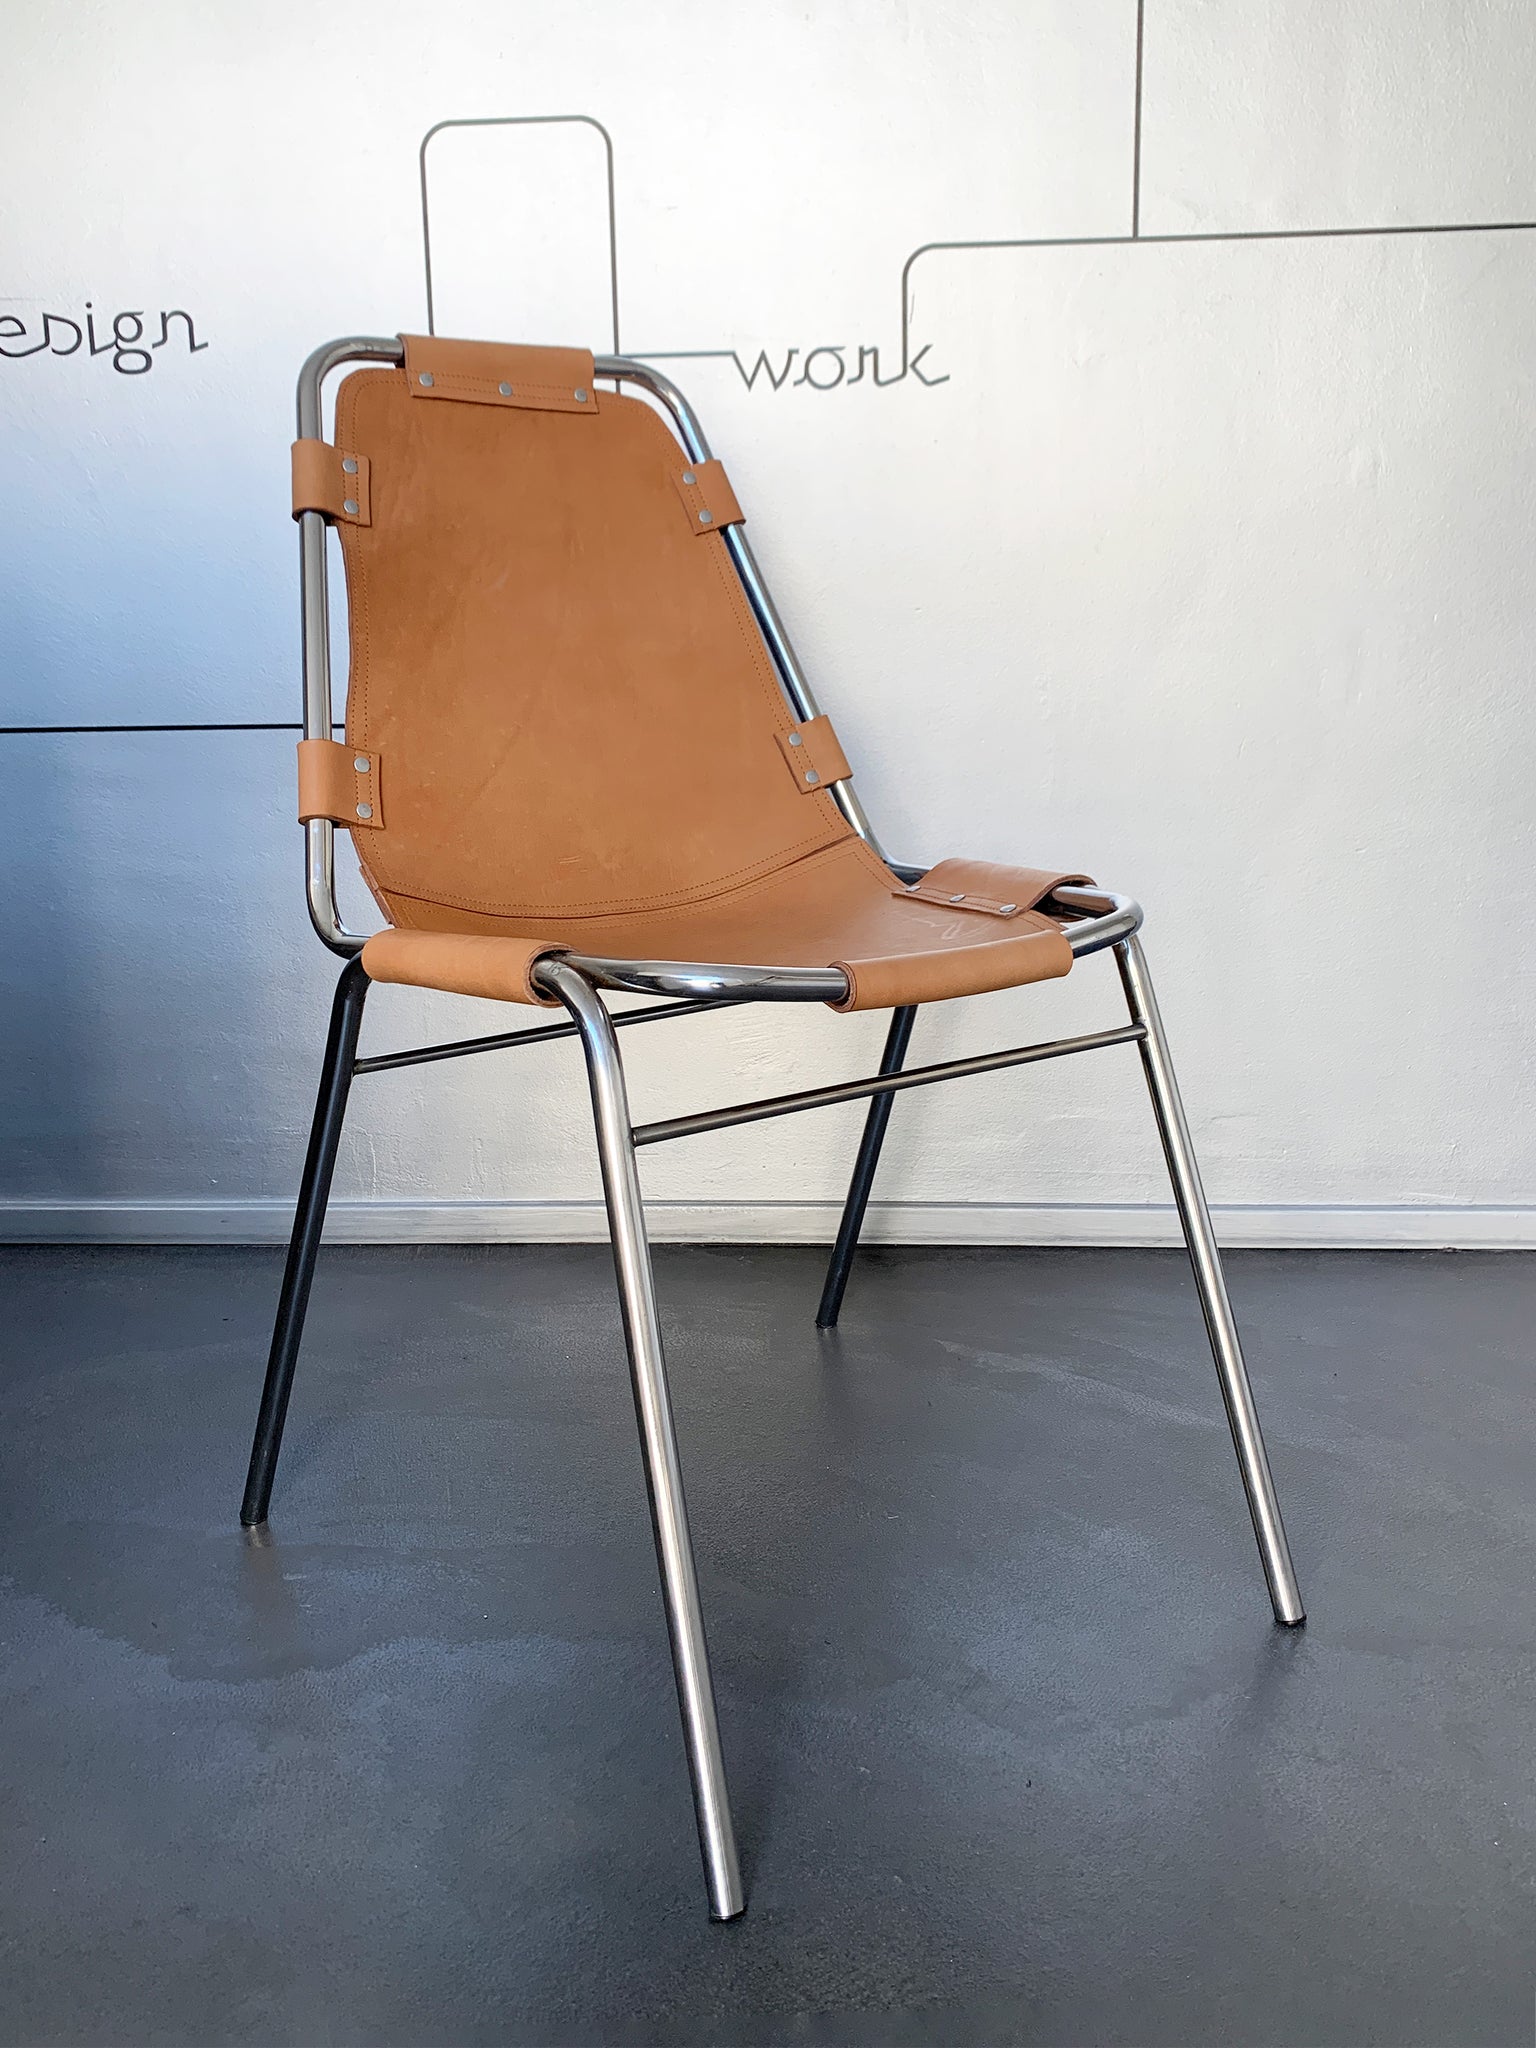 Les Arc' Chair Selected by Charlotte Perriand, 1960 – Gallery L7